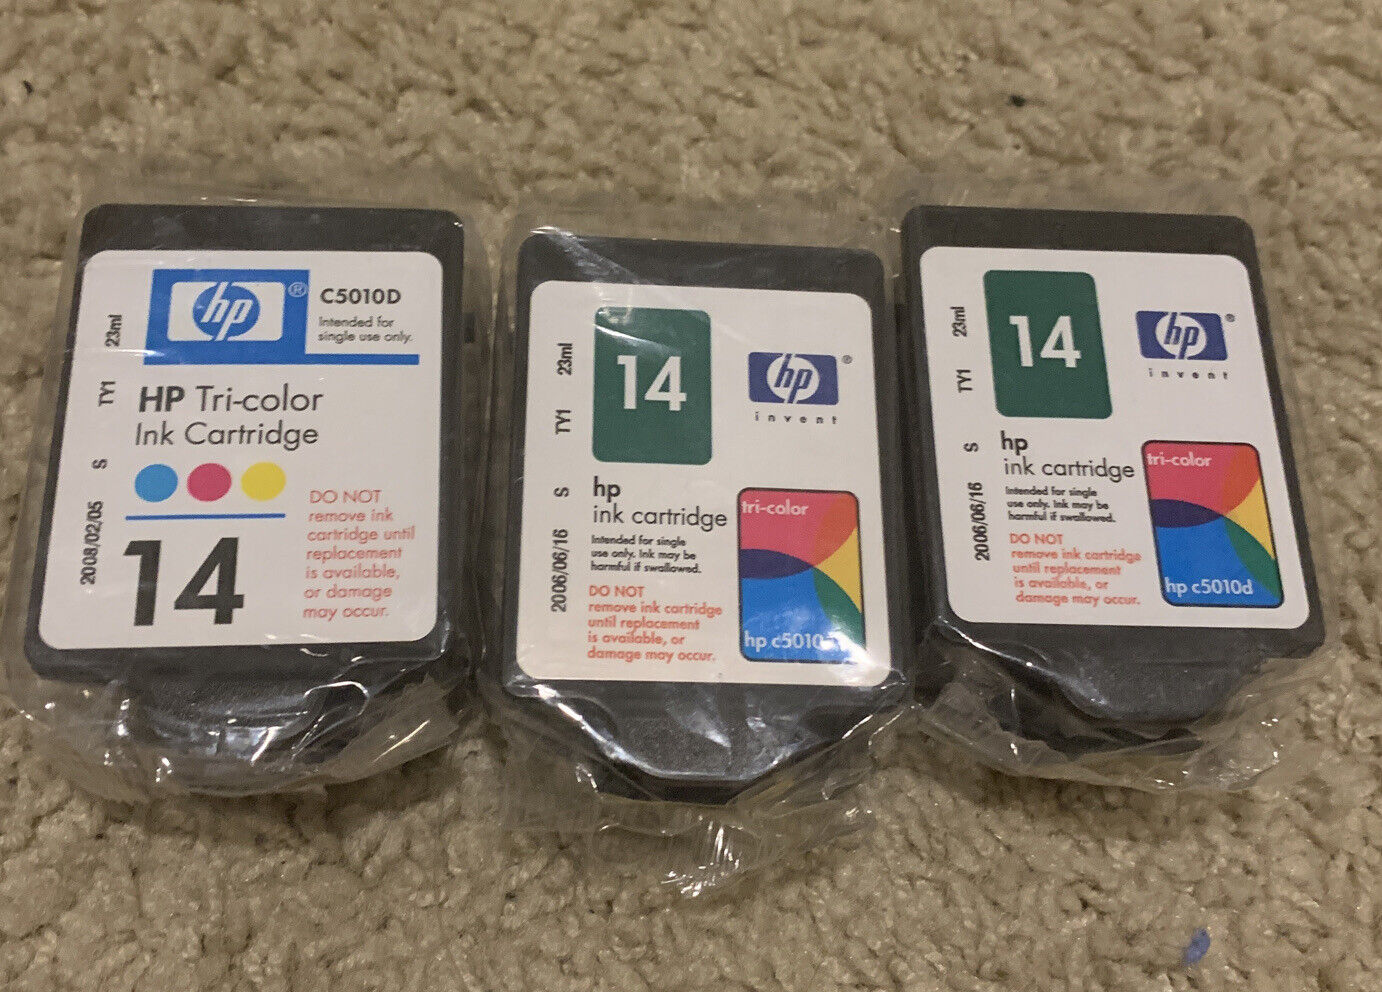 HP Ink Expired Cartridges-14 Tri Color C5010D-Set Of 3